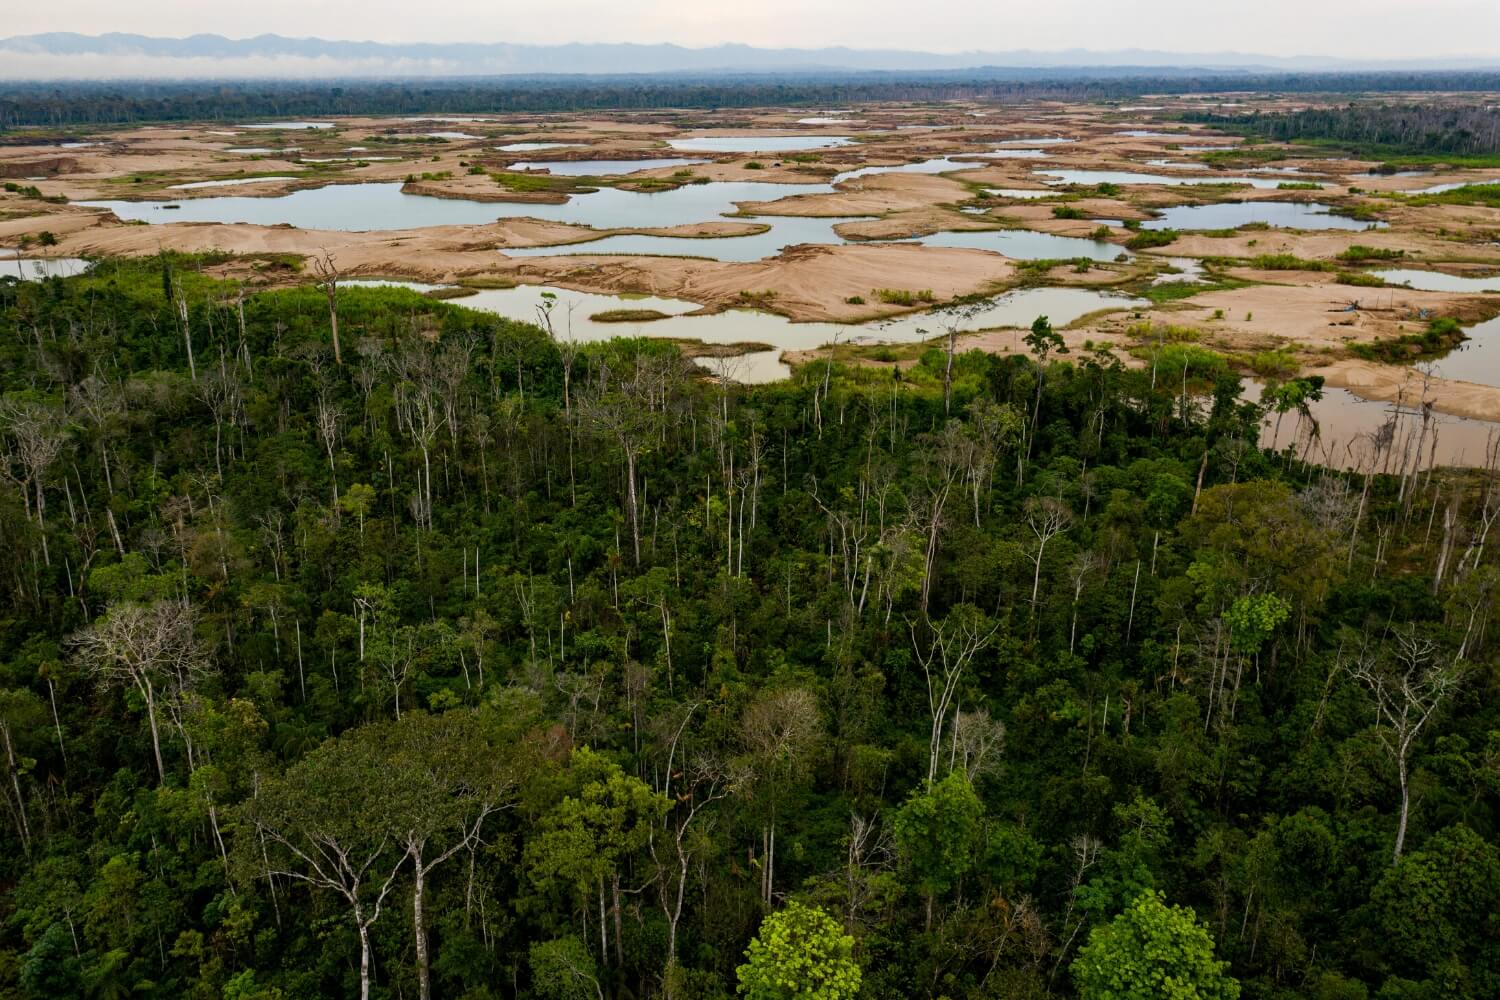 APPROXIMATELY 20% OF THE AMAZON RAINFOREST HAS BEEN LOST ALREADY